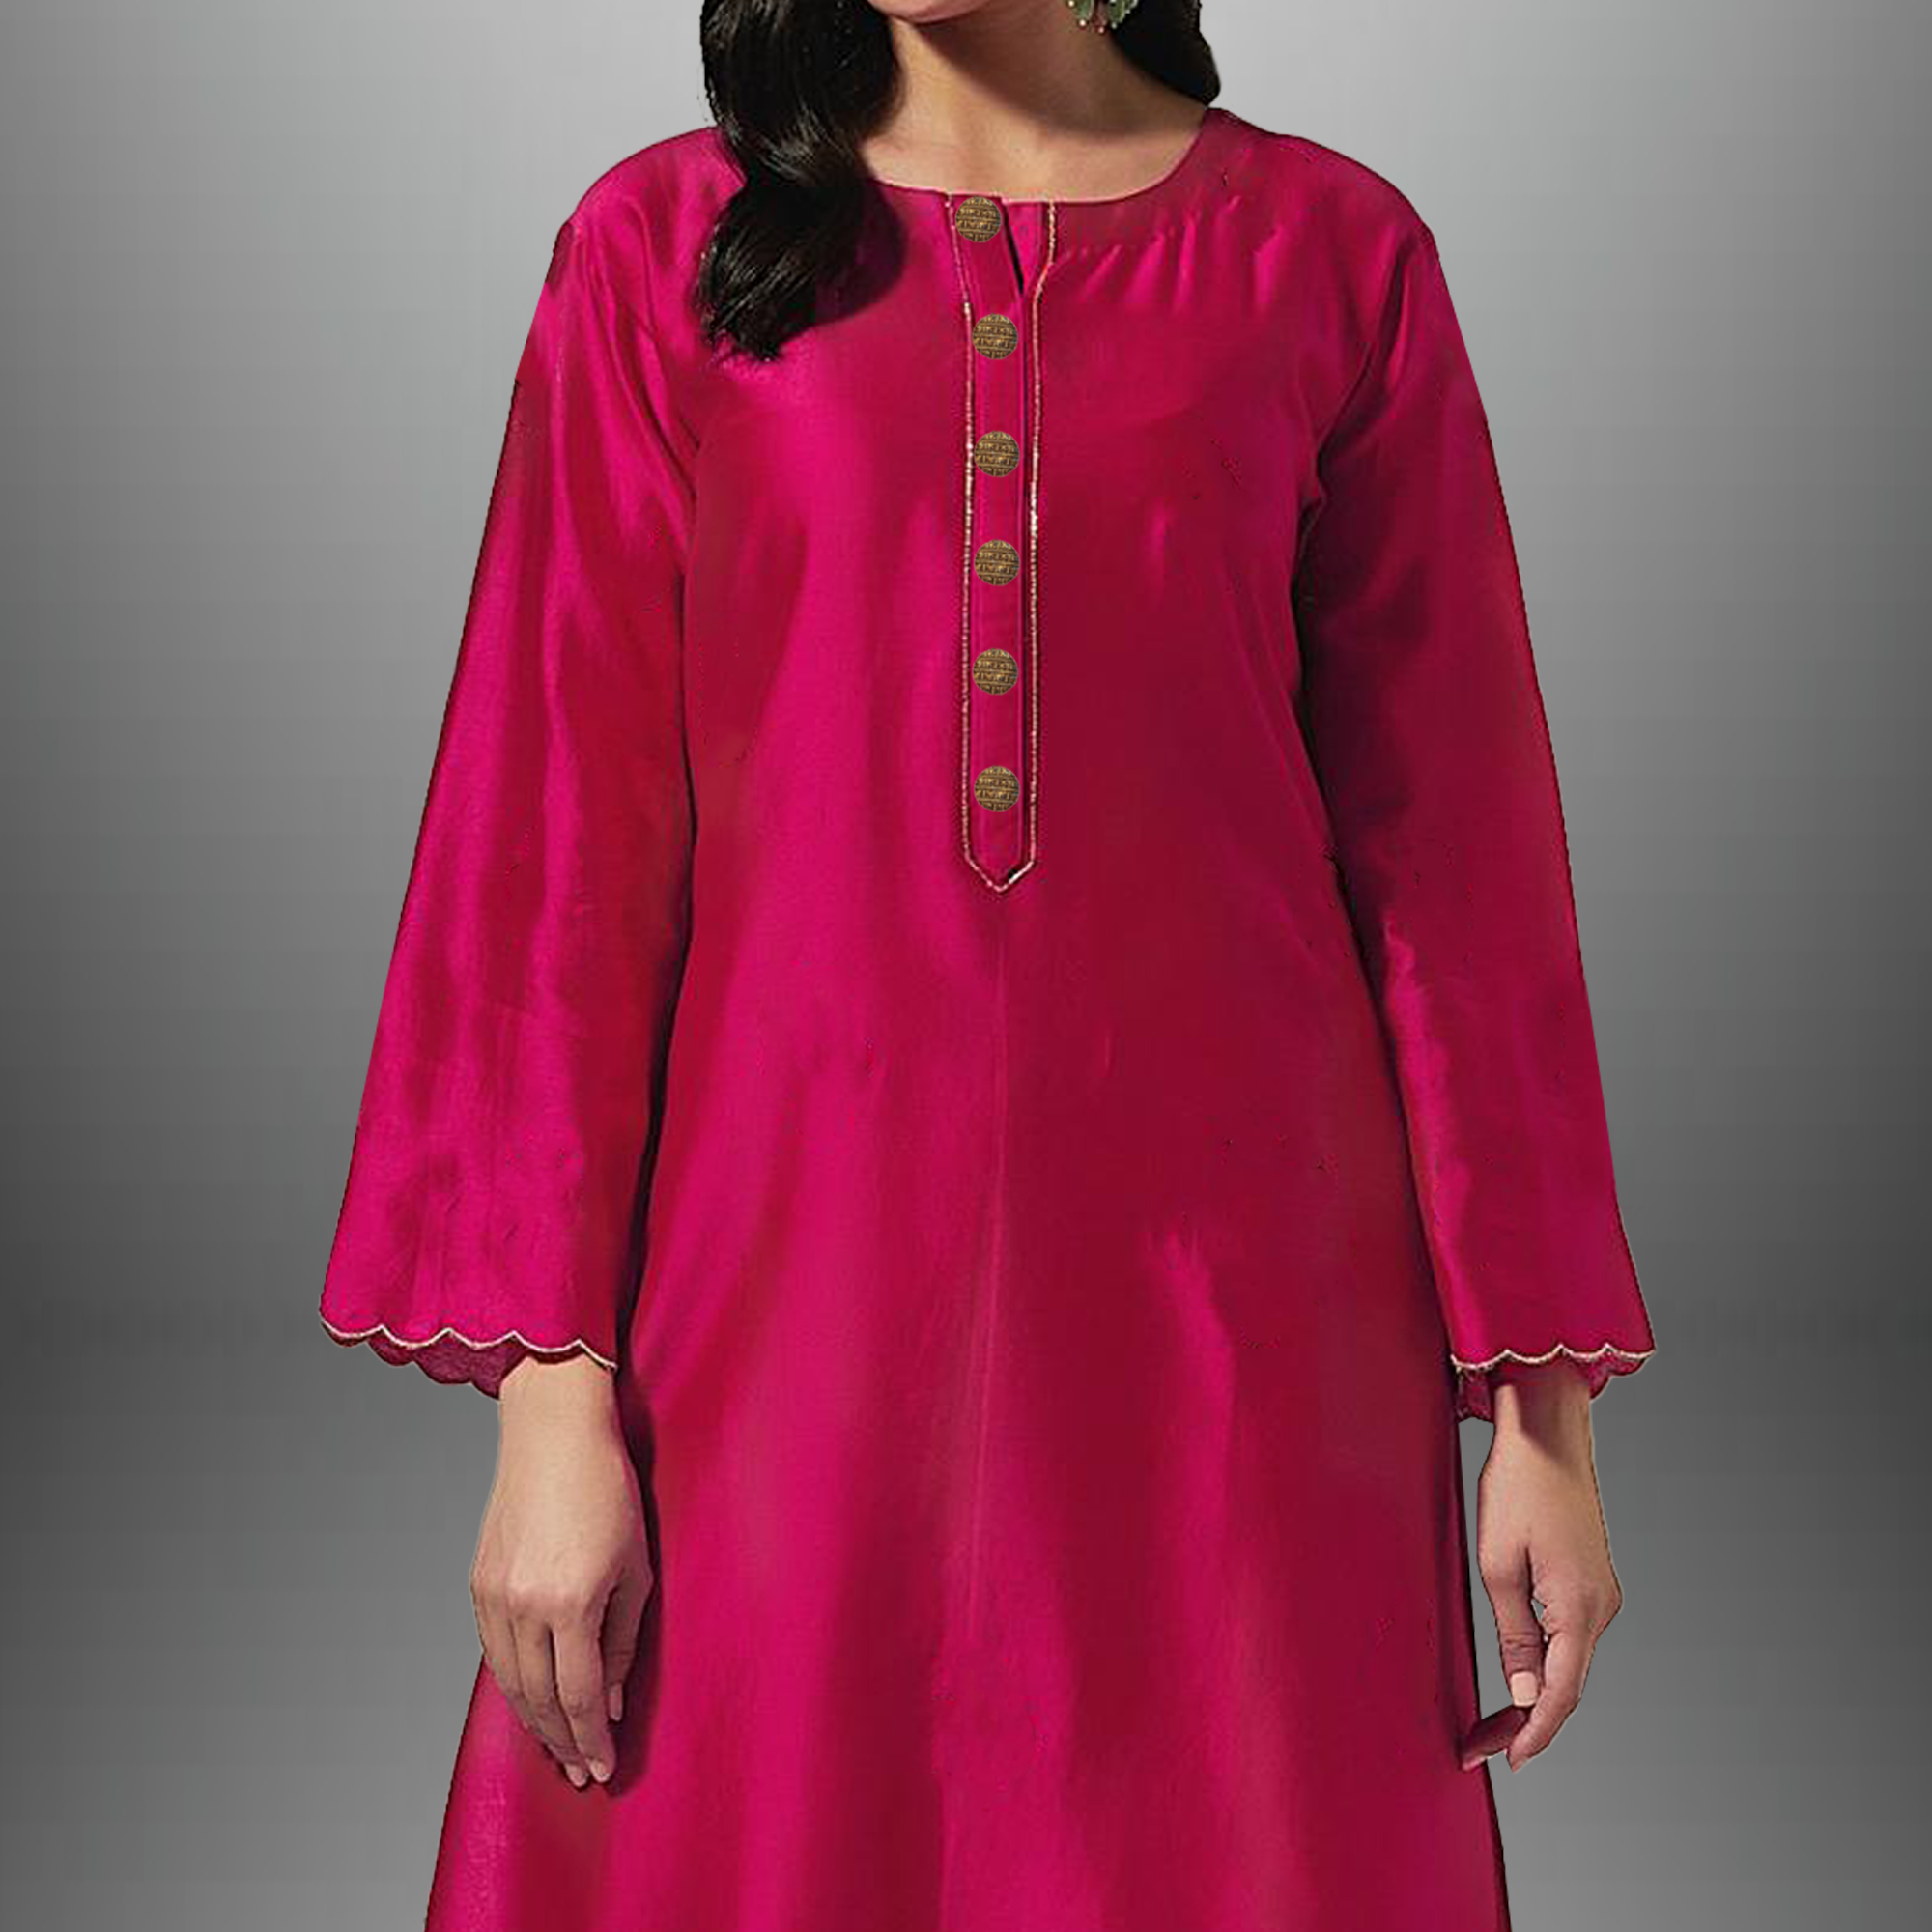 Women's Bright pink kurti set with button embellishment and embroidery work-RWKS018